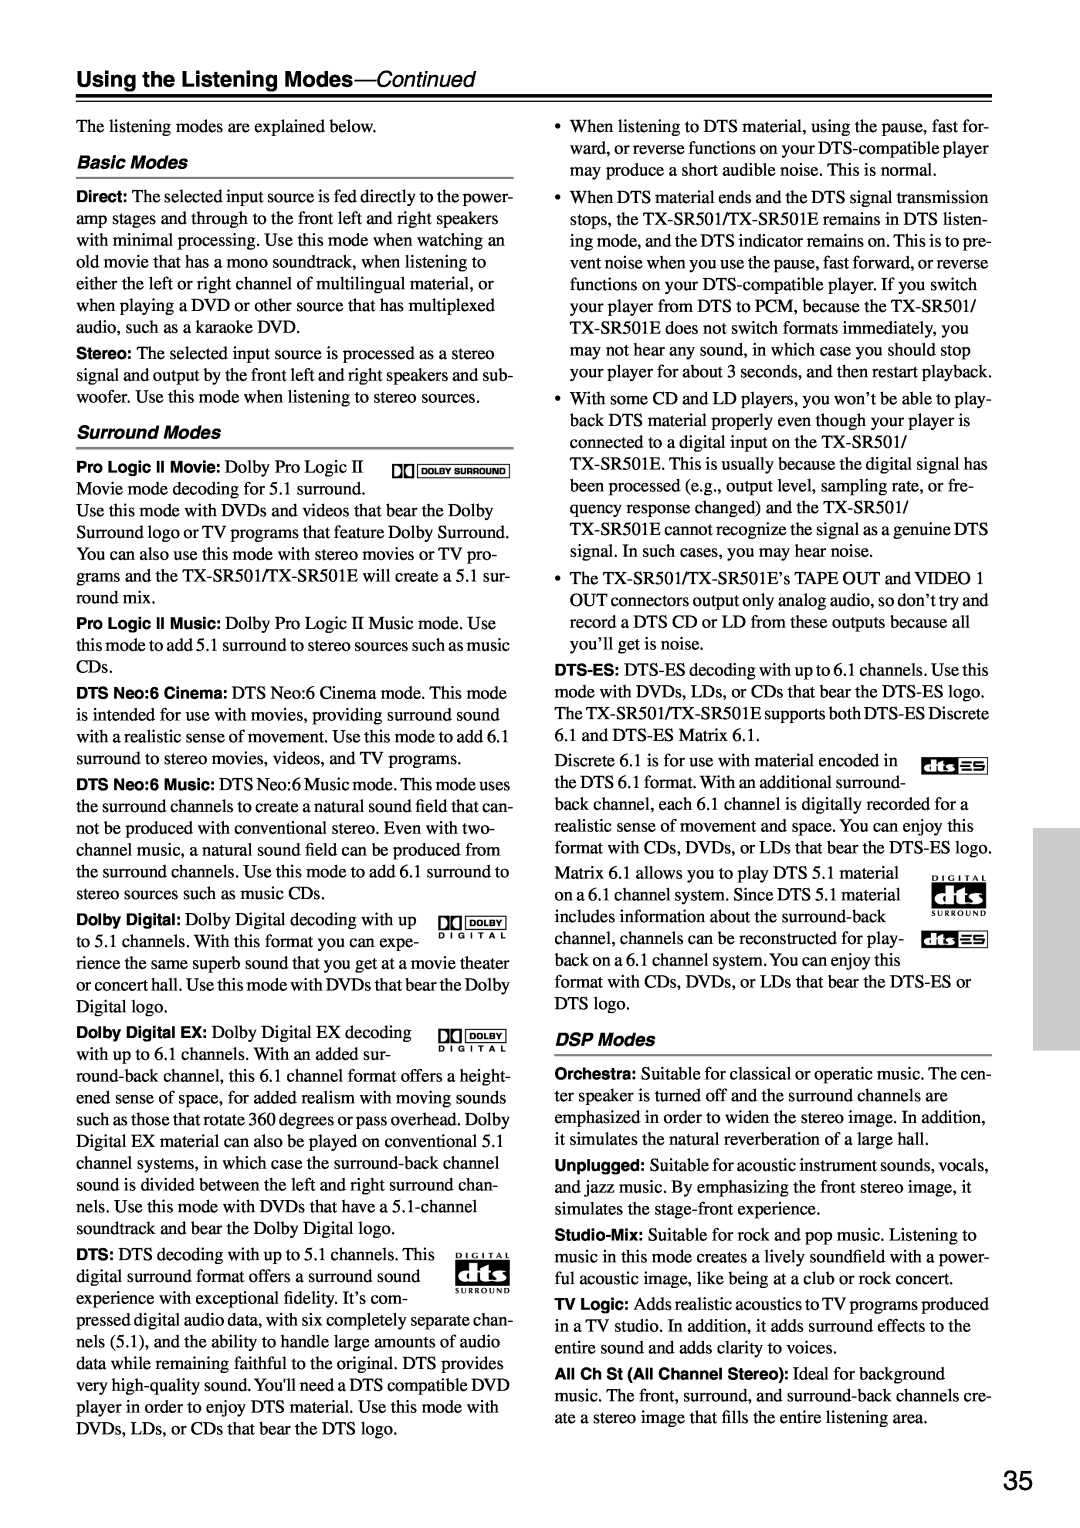 Onkyo TX-SR501E instruction manual Using the Listening Modes-Continued, Basic Modes, Surround Modes, DSP Modes 